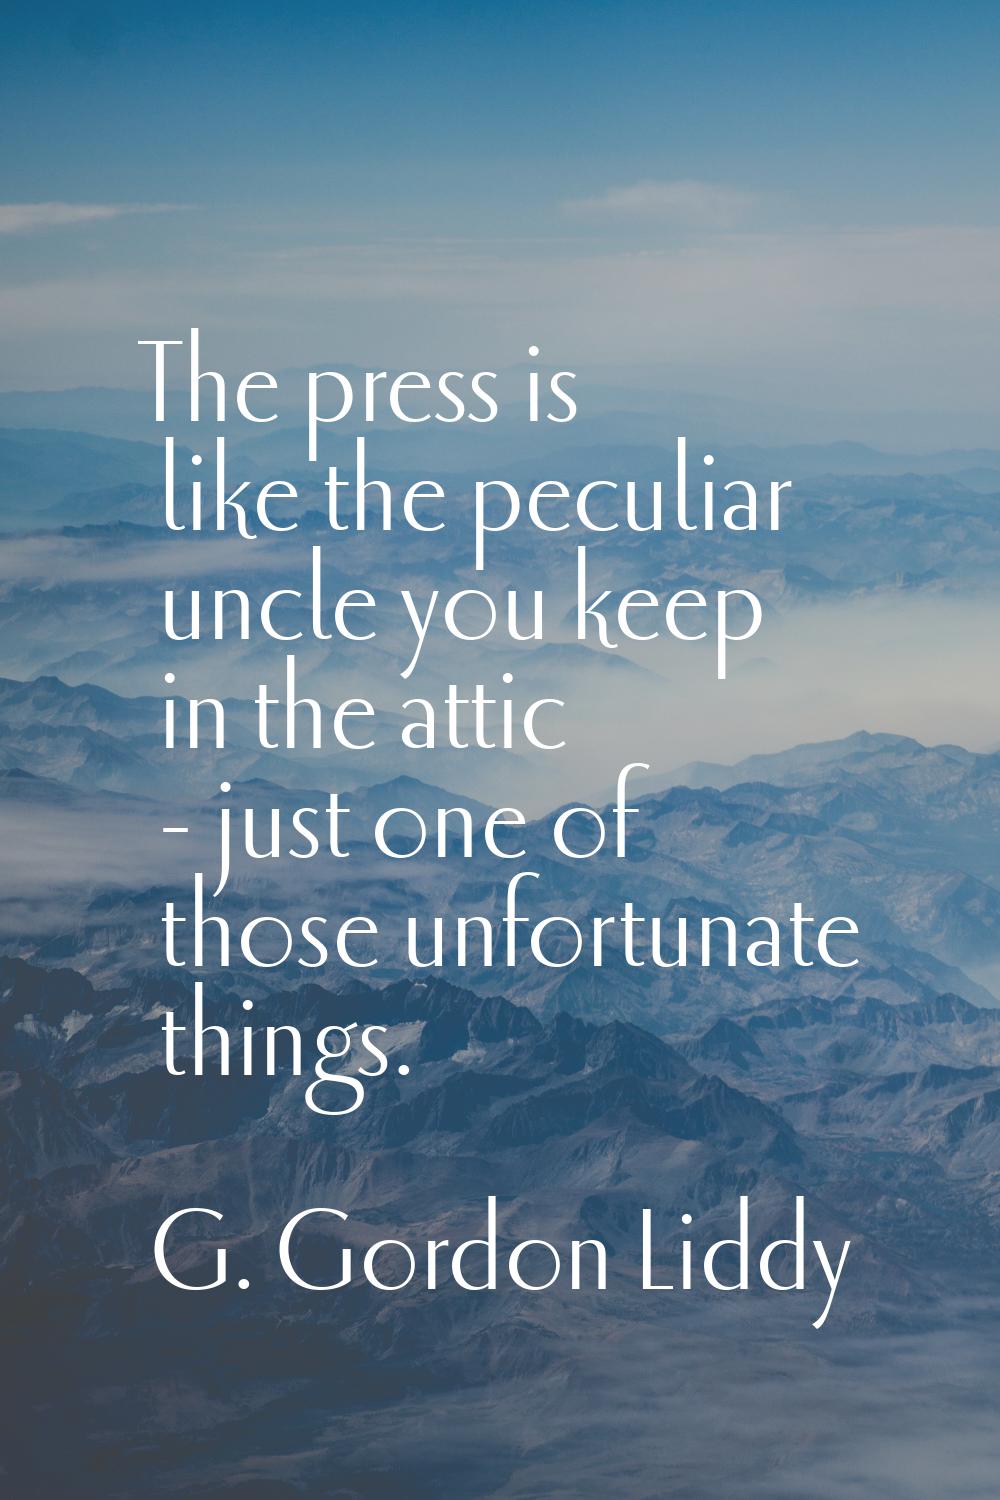 The press is like the peculiar uncle you keep in the attic - just one of those unfortunate things.